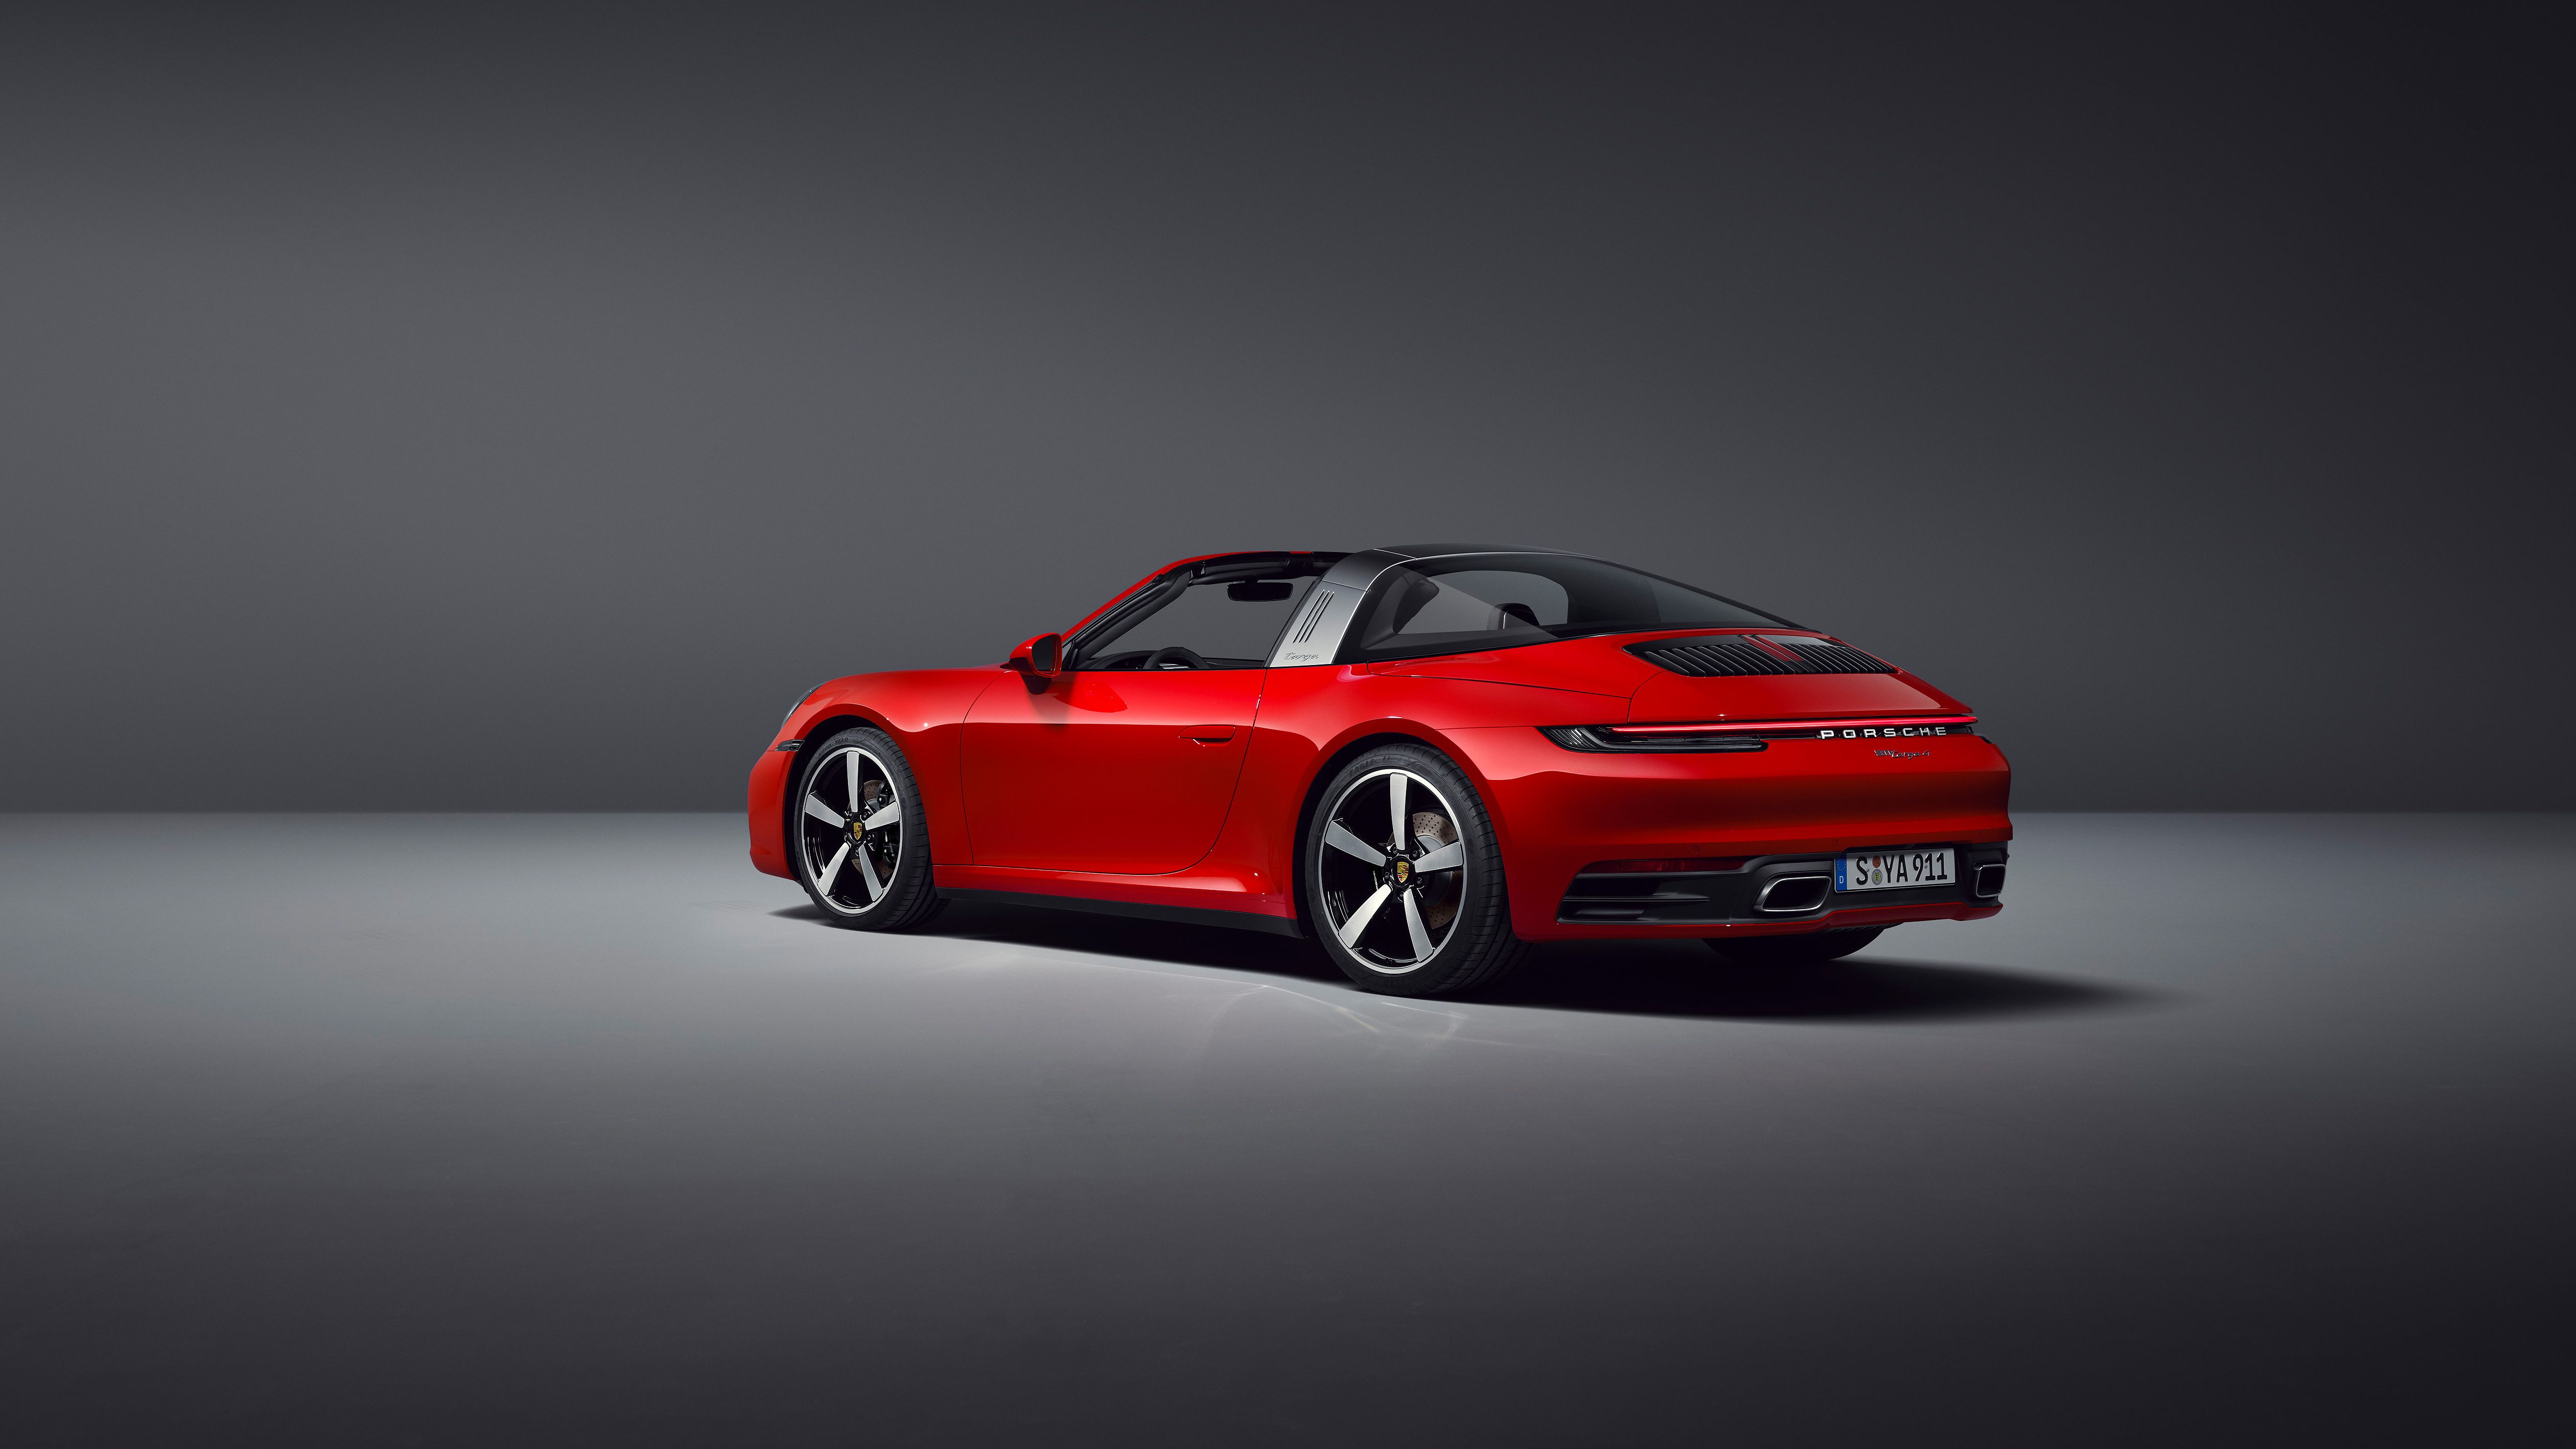 2021 The 2021 Porsche 911 Targa 4S Is Obese Compared To the Original 911